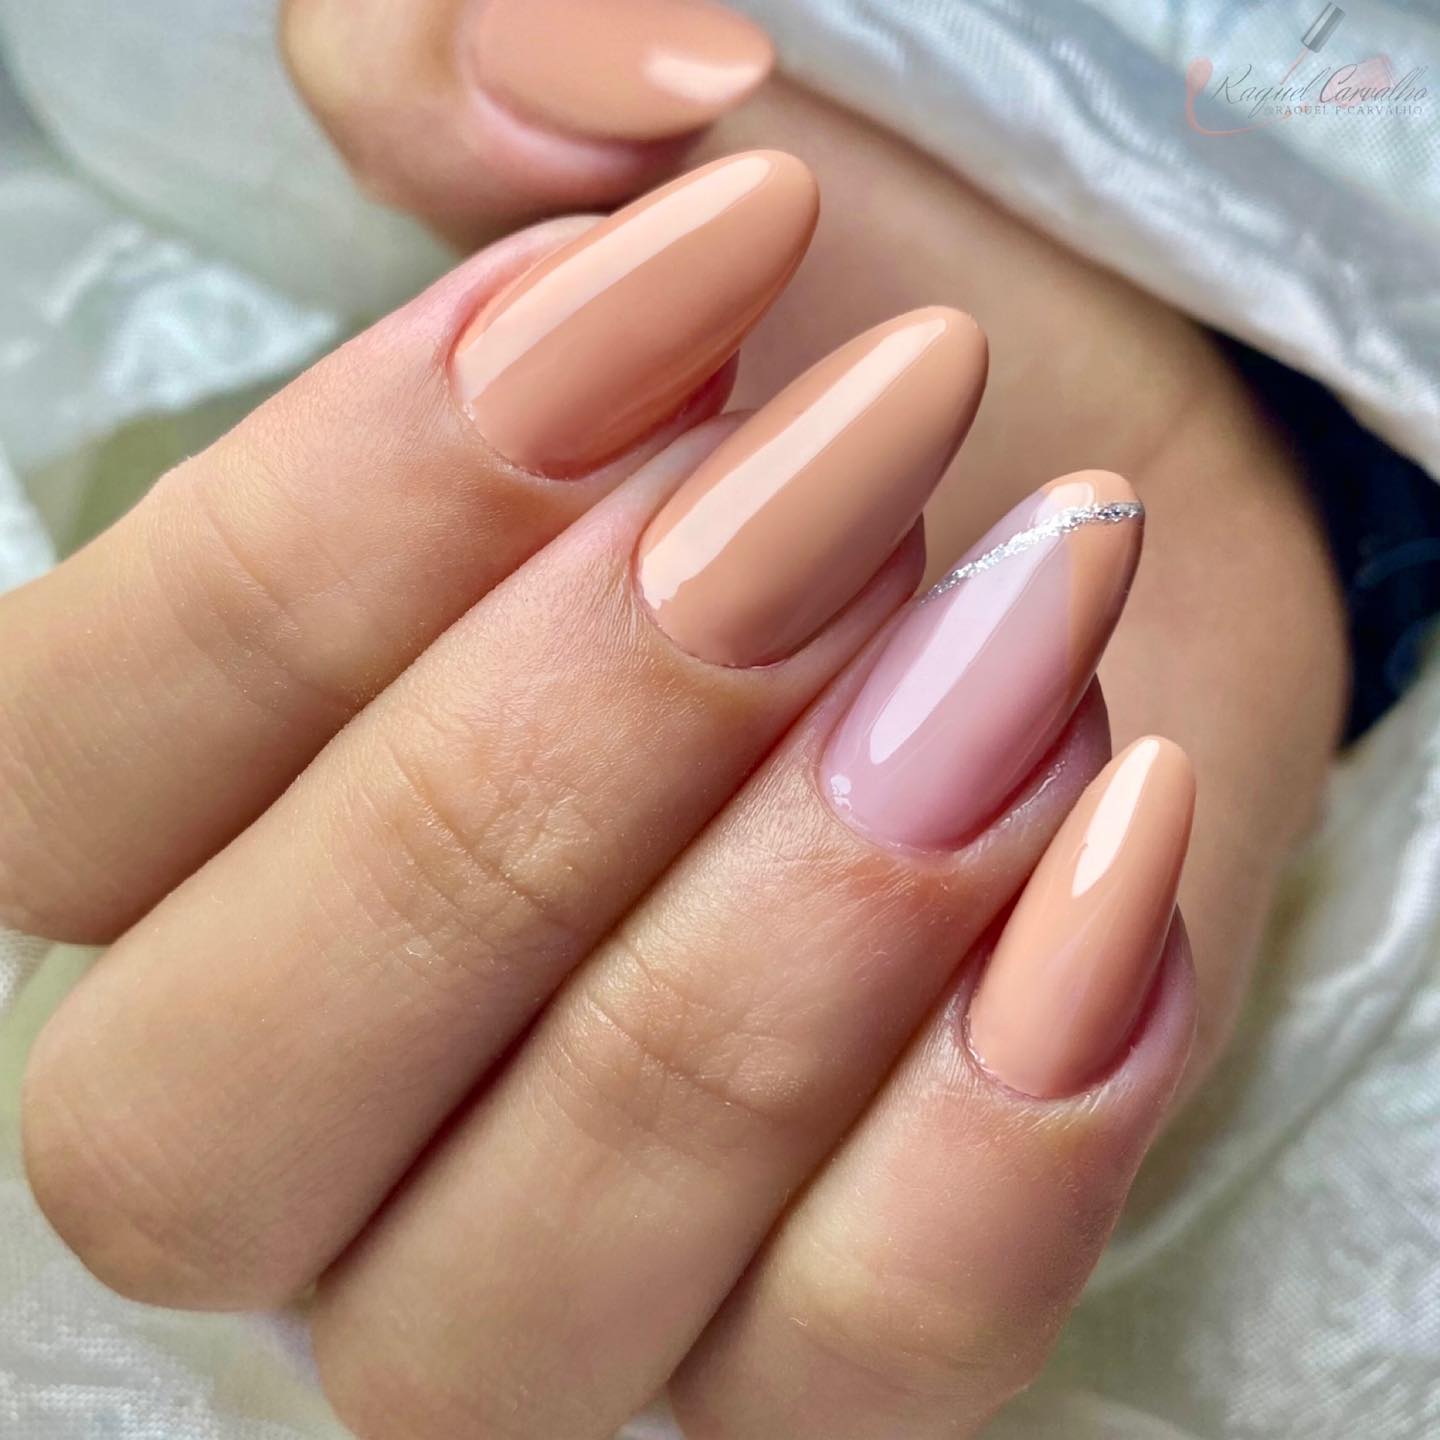 30 Easy Nails & Nail Art Designs To Try In 2022 images 27